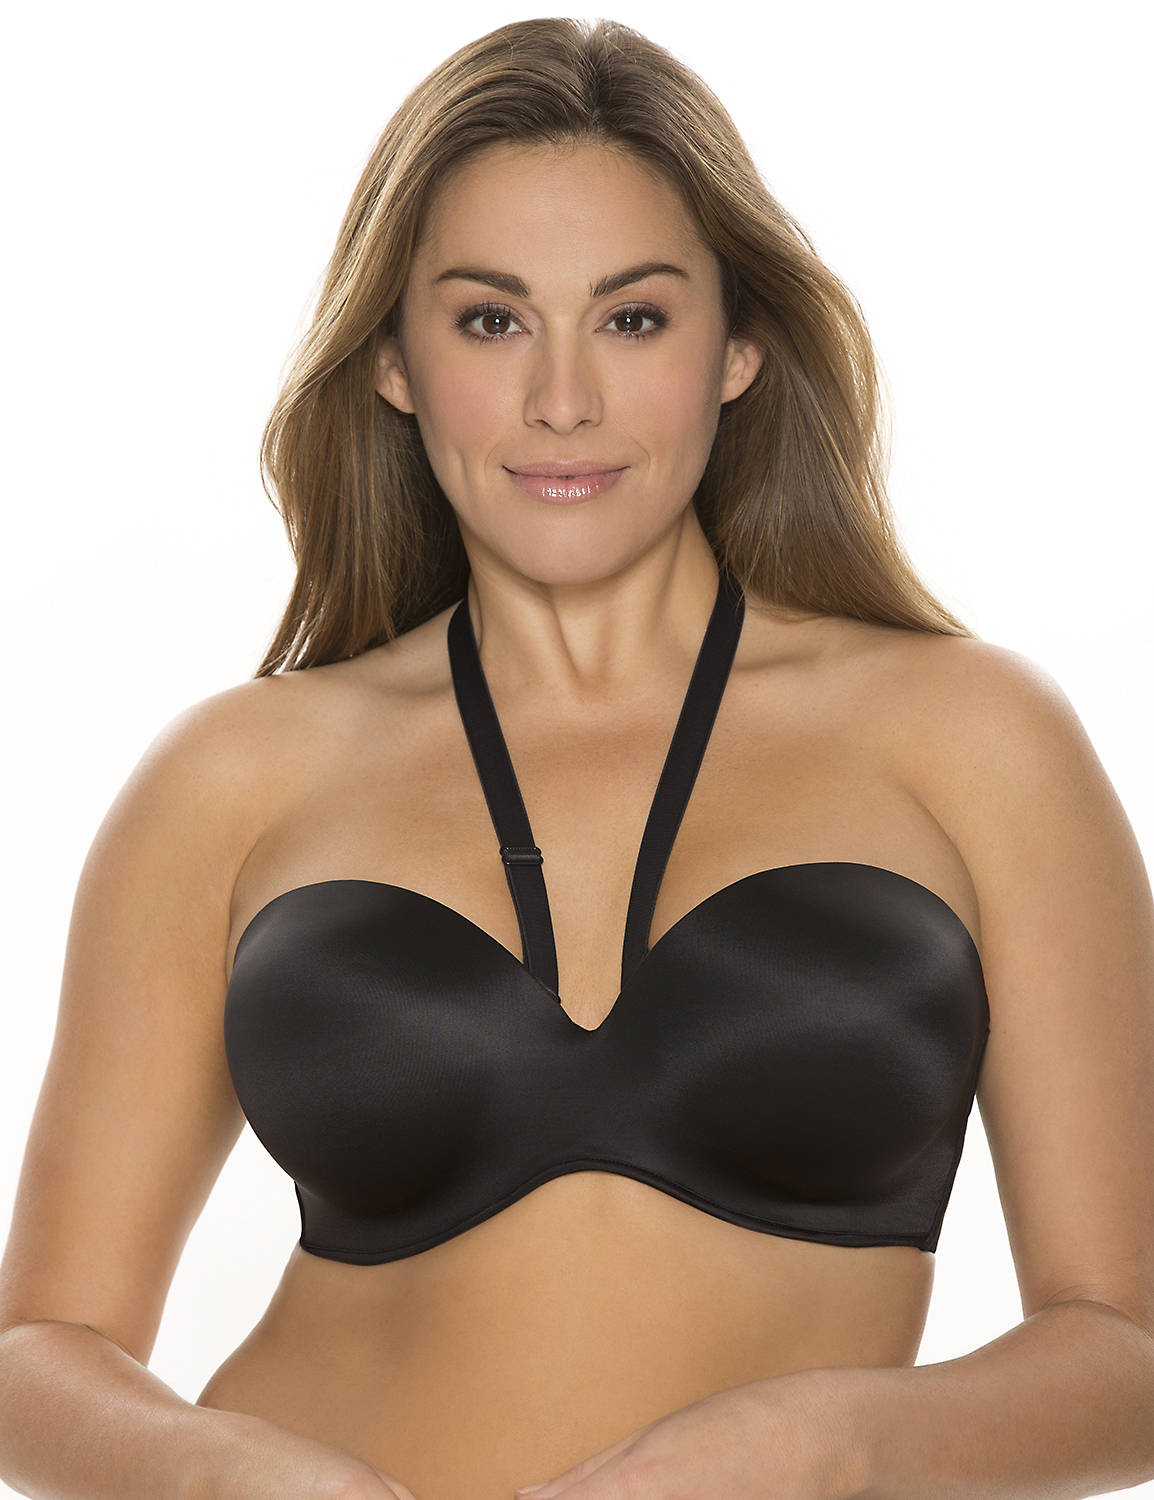 STRAPLESS Black 36DDD Product Image 2